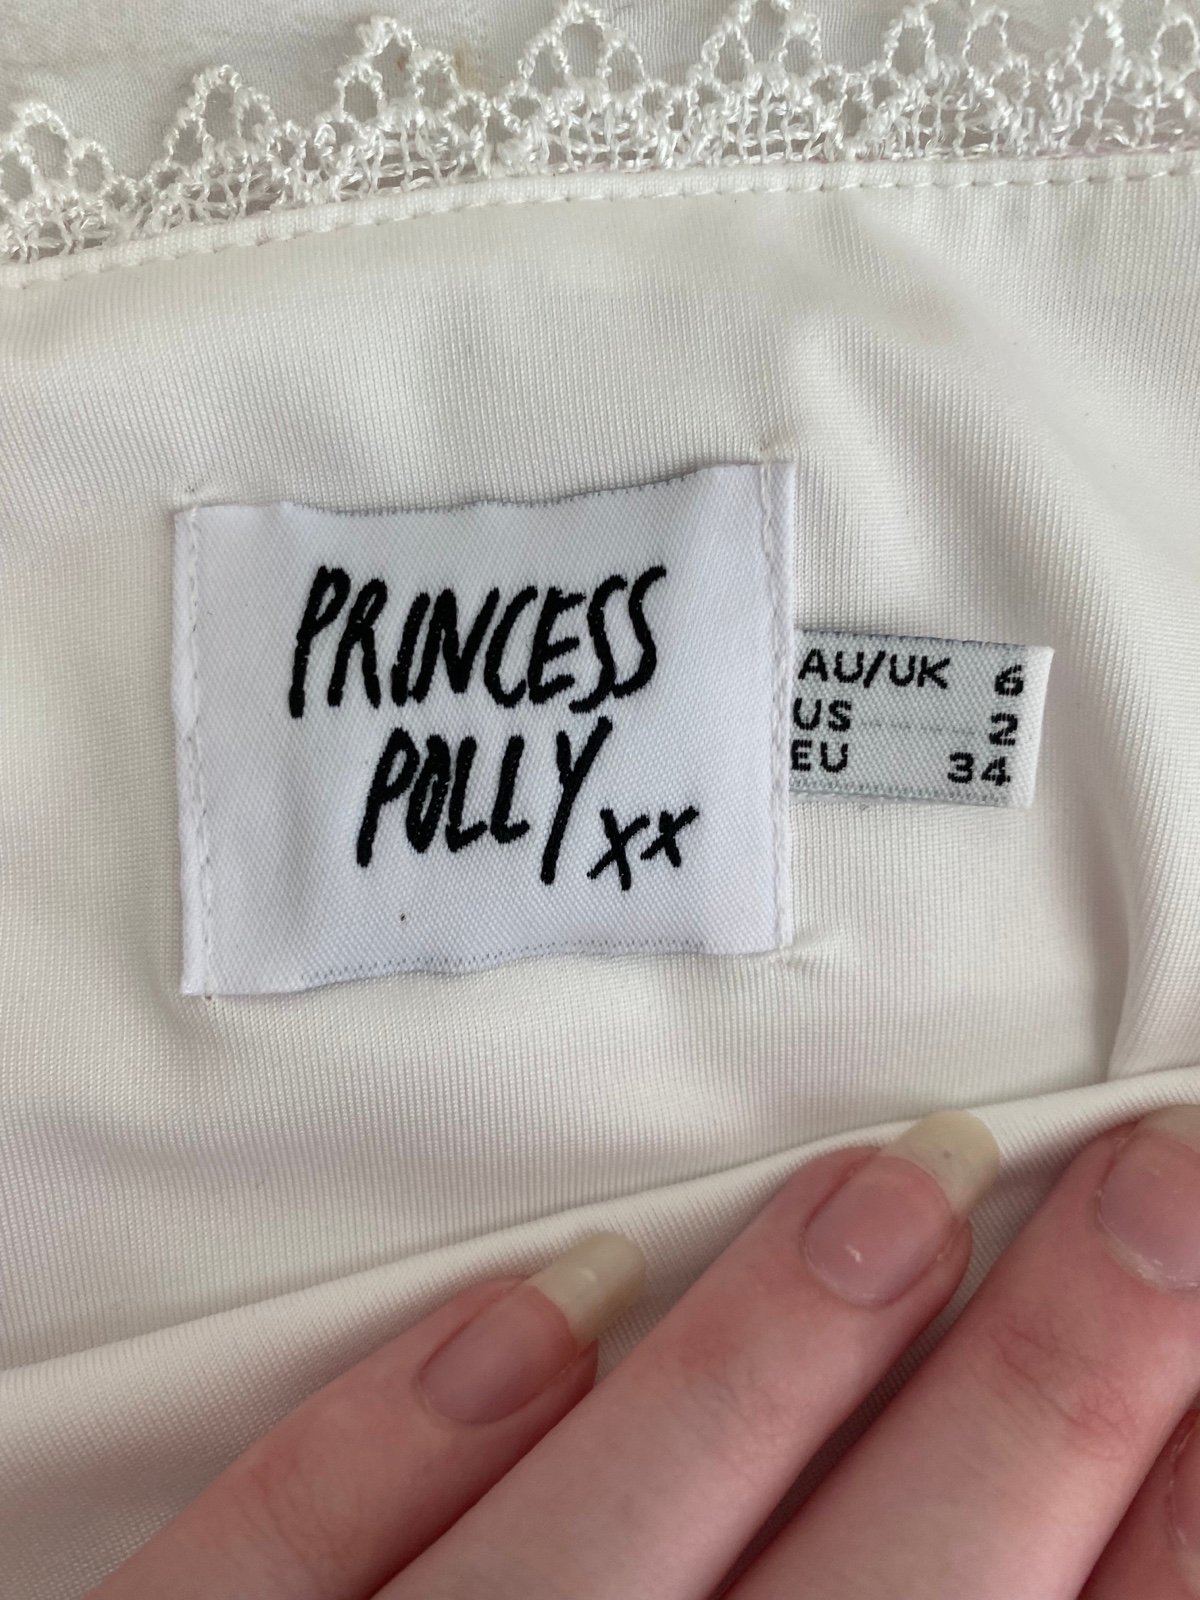 Gorgeous ADORABLE PRINCESS POLLY SKIRT SIZE 2 MktwaEjdT Buying Cheap